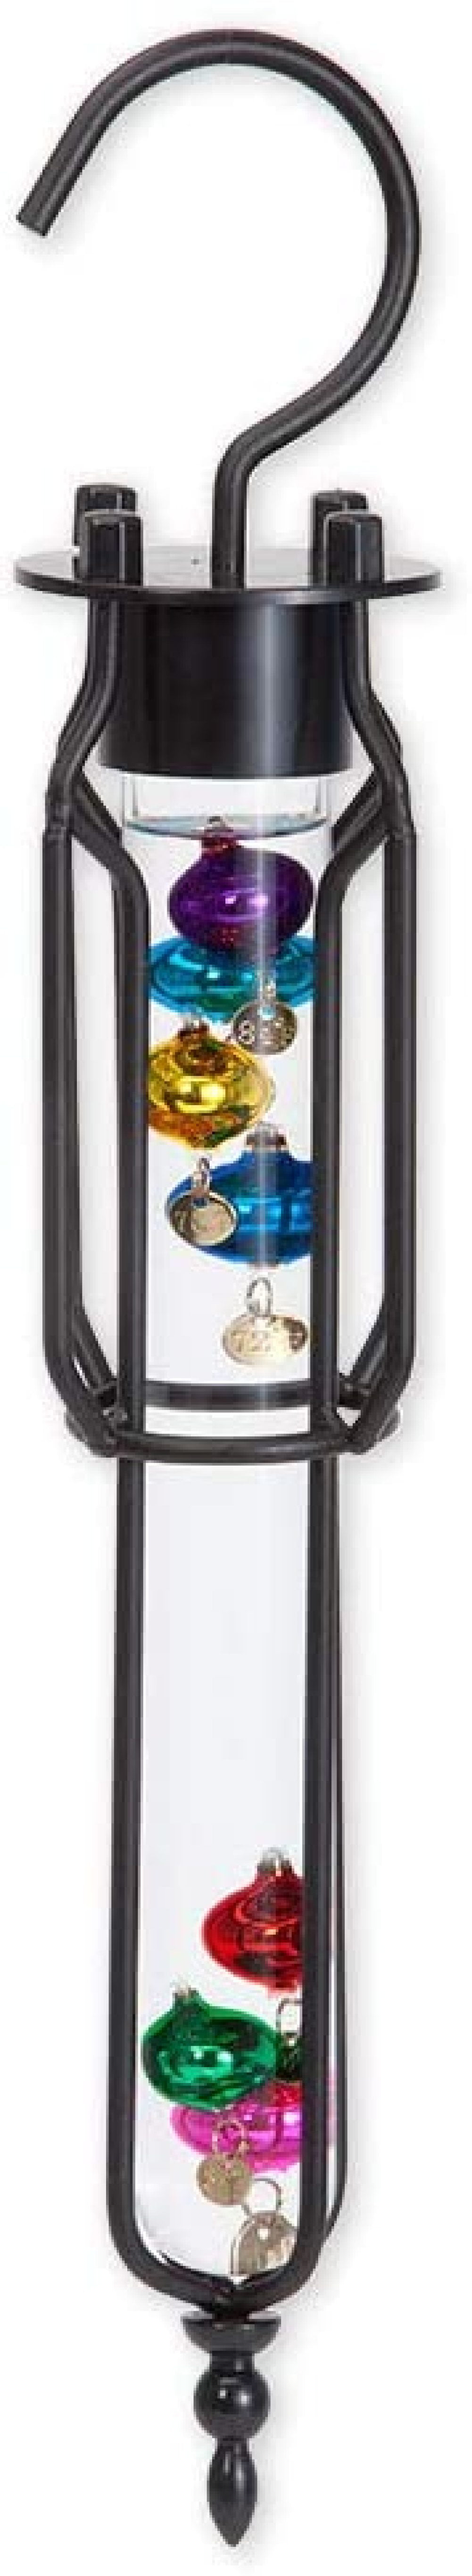 Lot - 28in Rustica Galileo Brass Hanging Thermometer